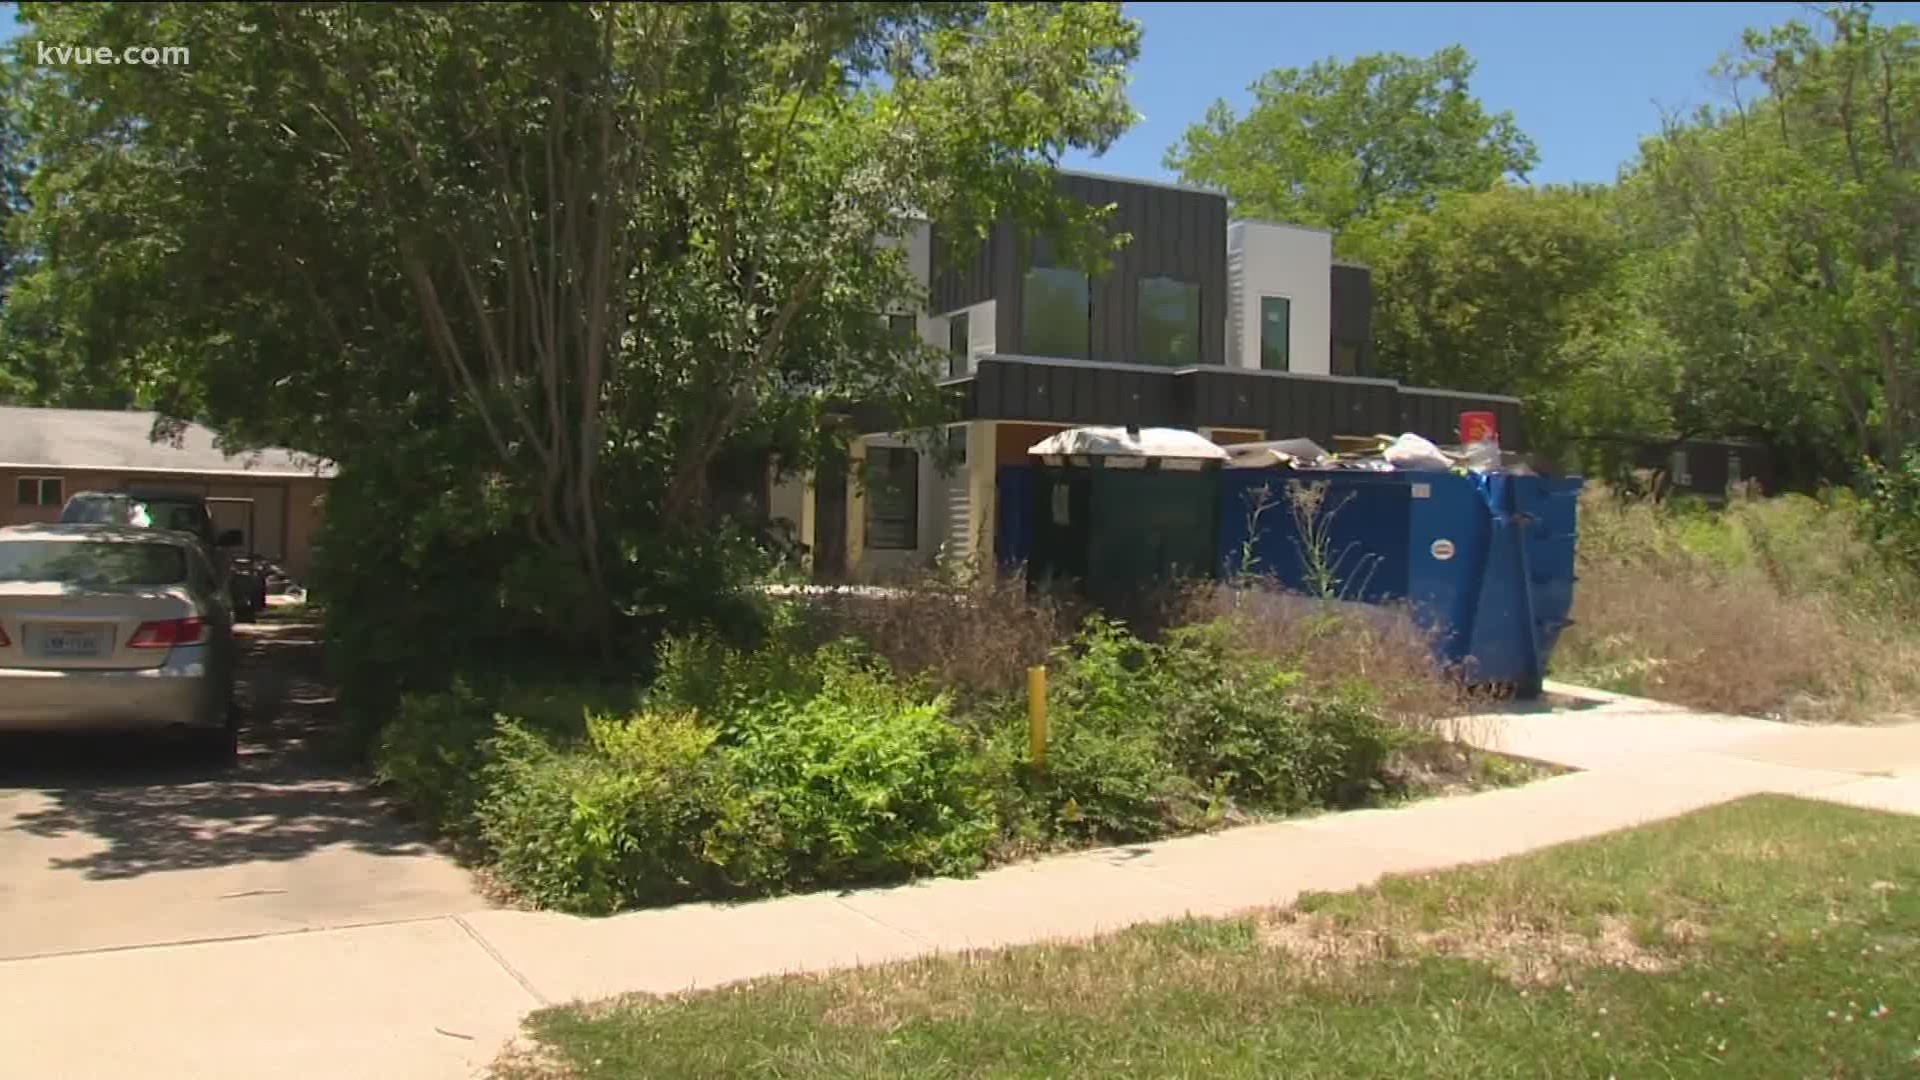 It was ugly, smelly and dangerous – an eyesore in a North Austin community that neighbors couldn't seem to shake. Then, the KVUE Defenders got involved.